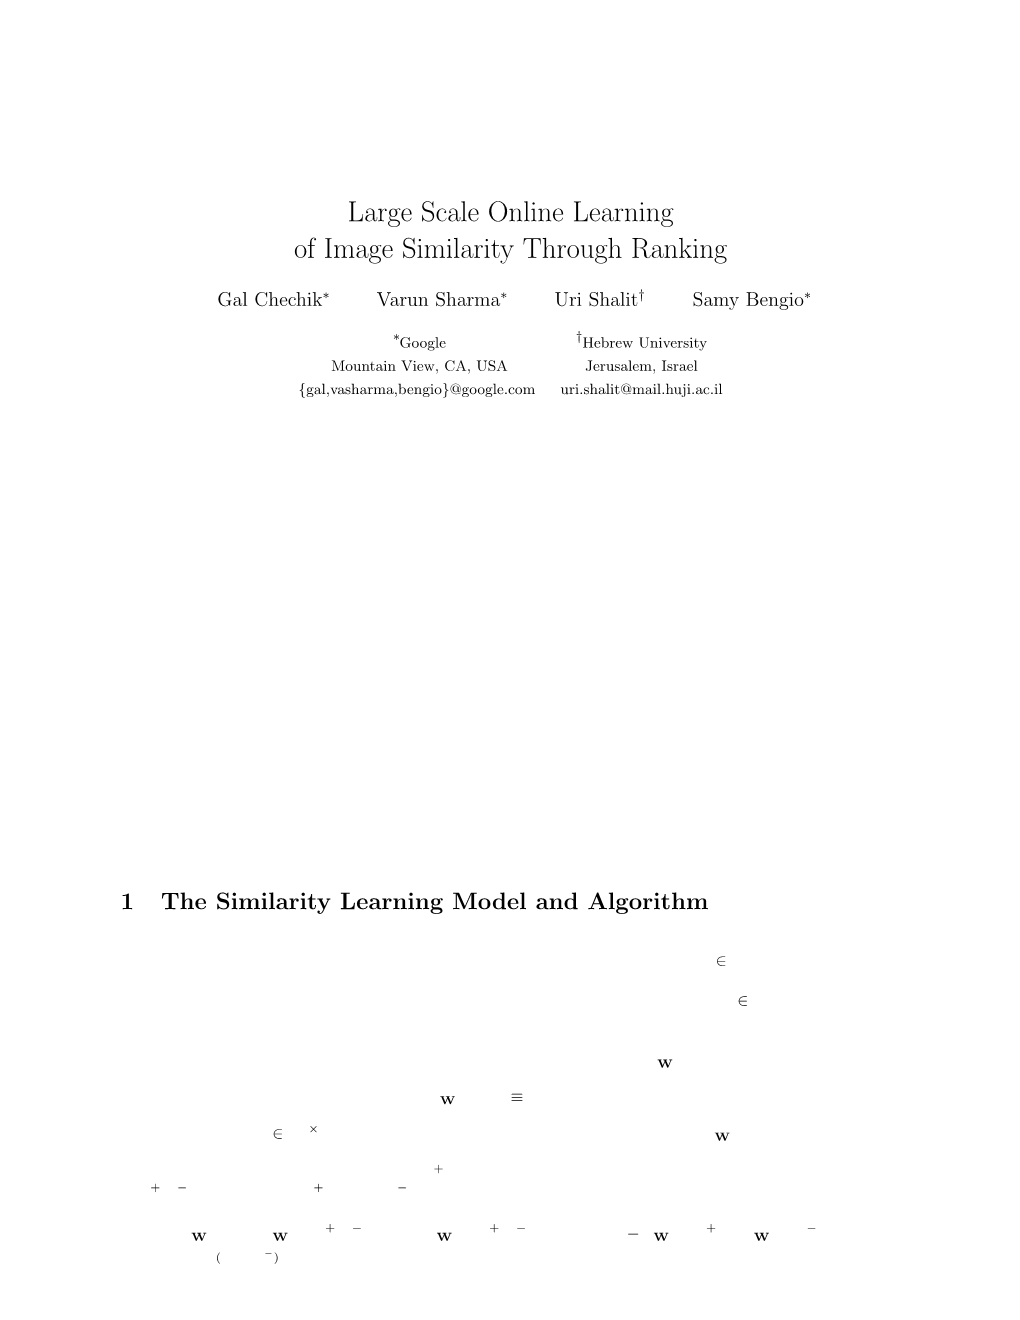 Large Scale Online Learning of Image Similarity Through Ranking